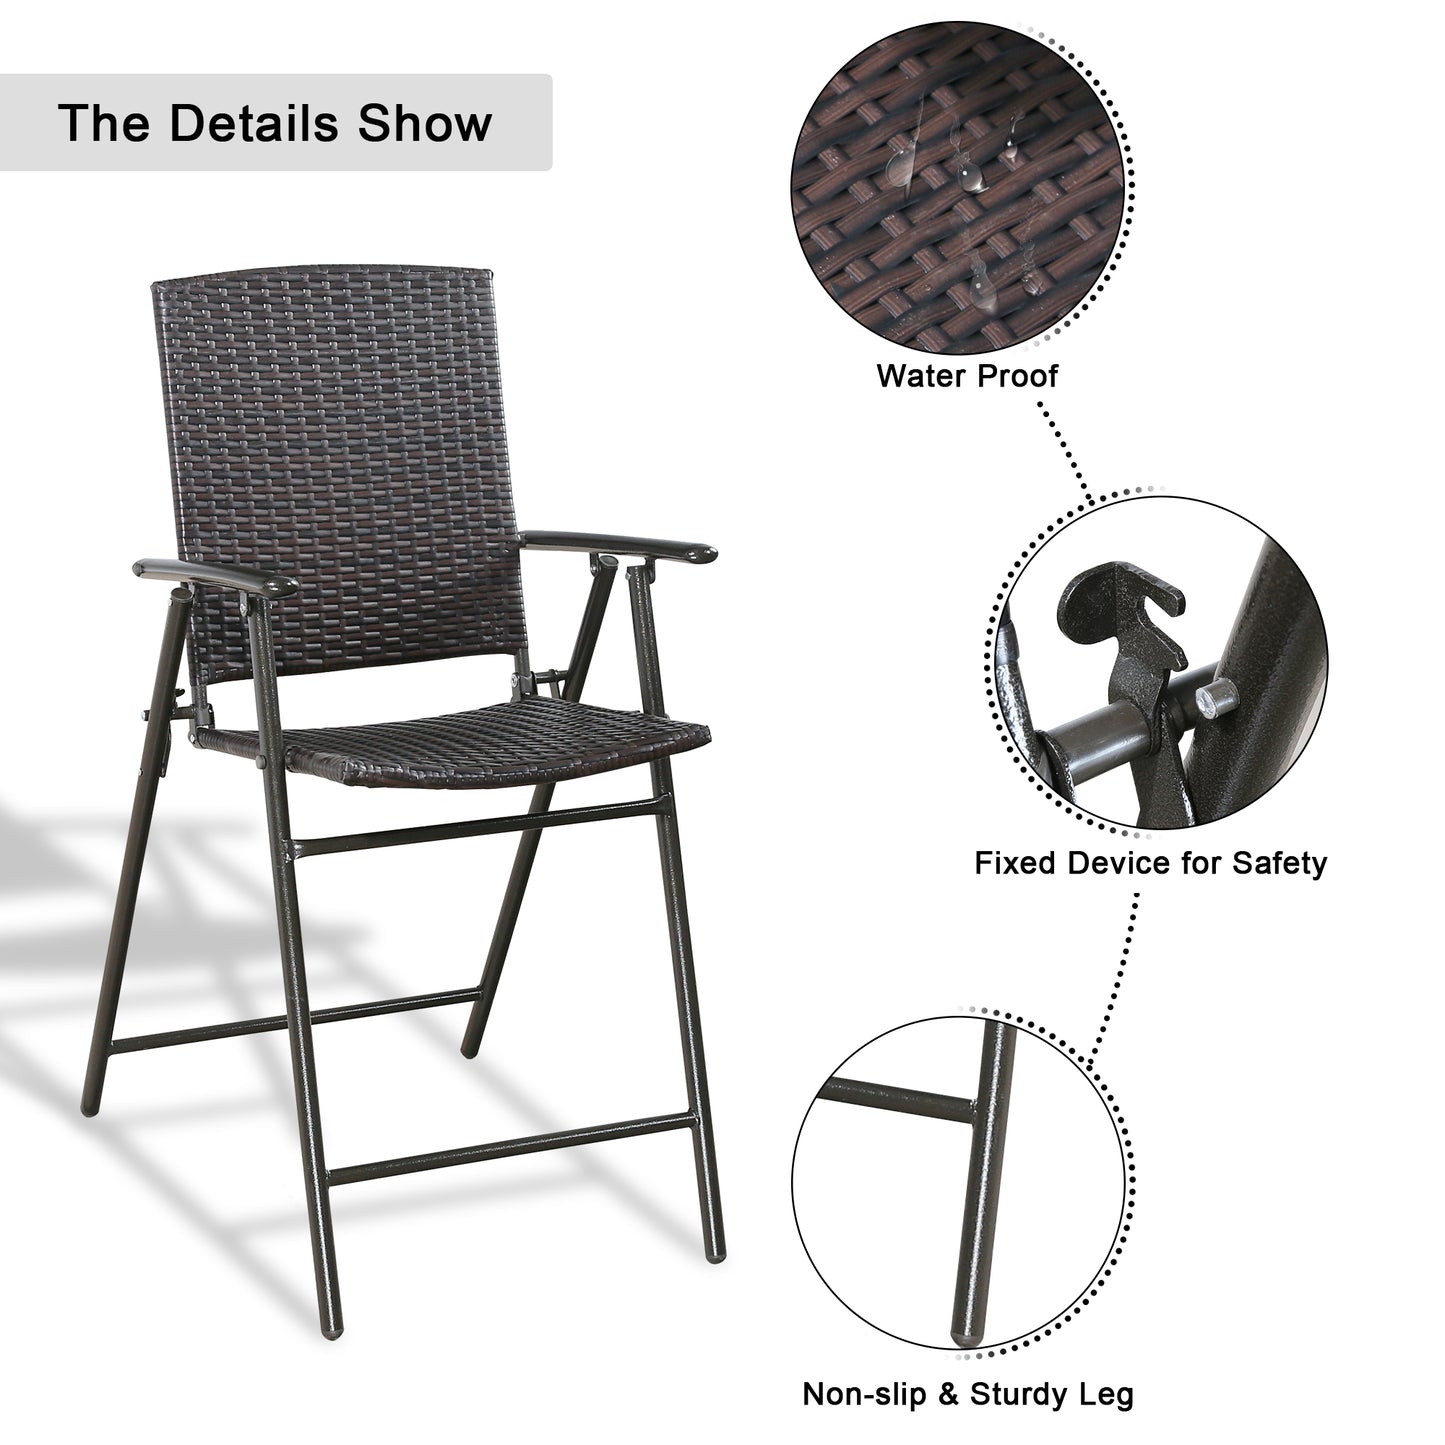 Patio All-Weather Folding Wicker Bar Chairs Set of 4 Outdoor Rattan Counter Stools